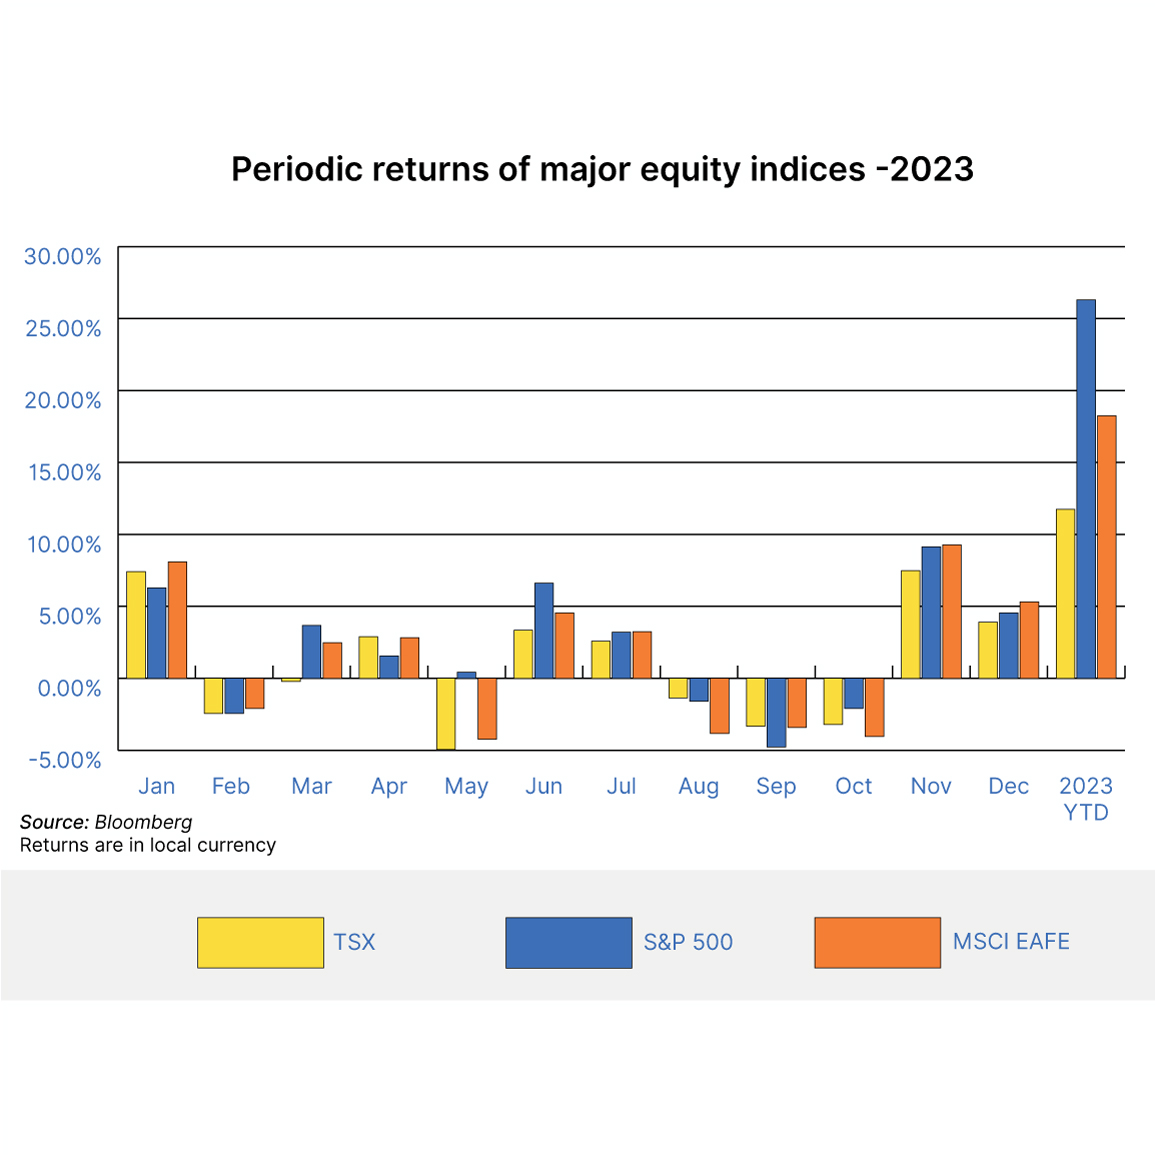 Periodic returns of major equity indices for 2023